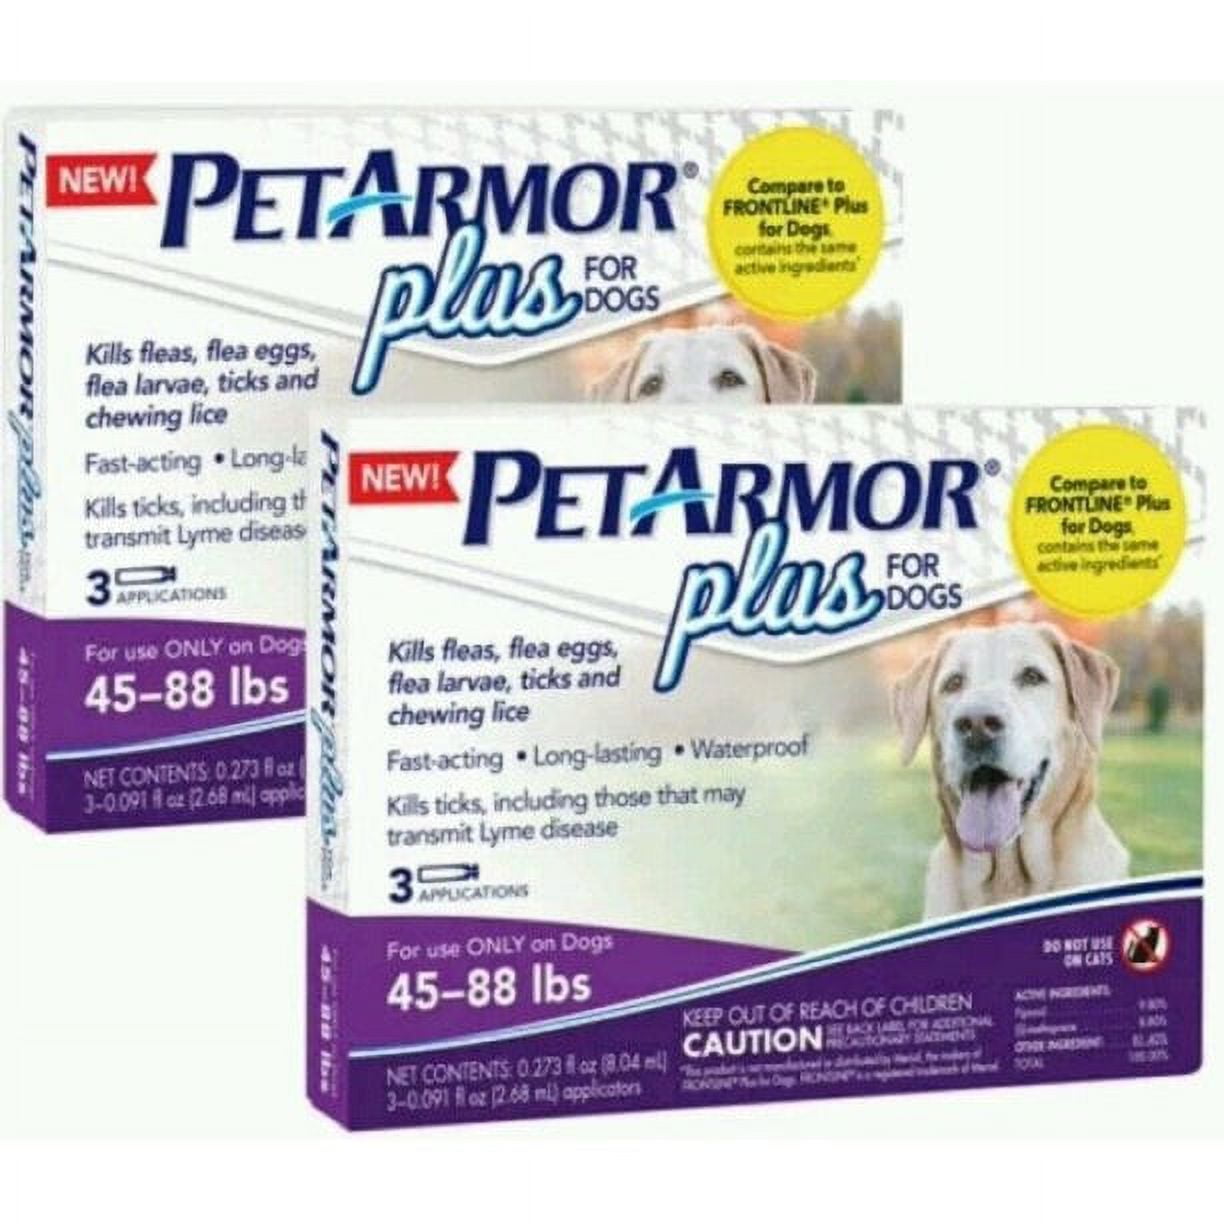 PETARMOR Plus for Large Dogs - 6 Applications